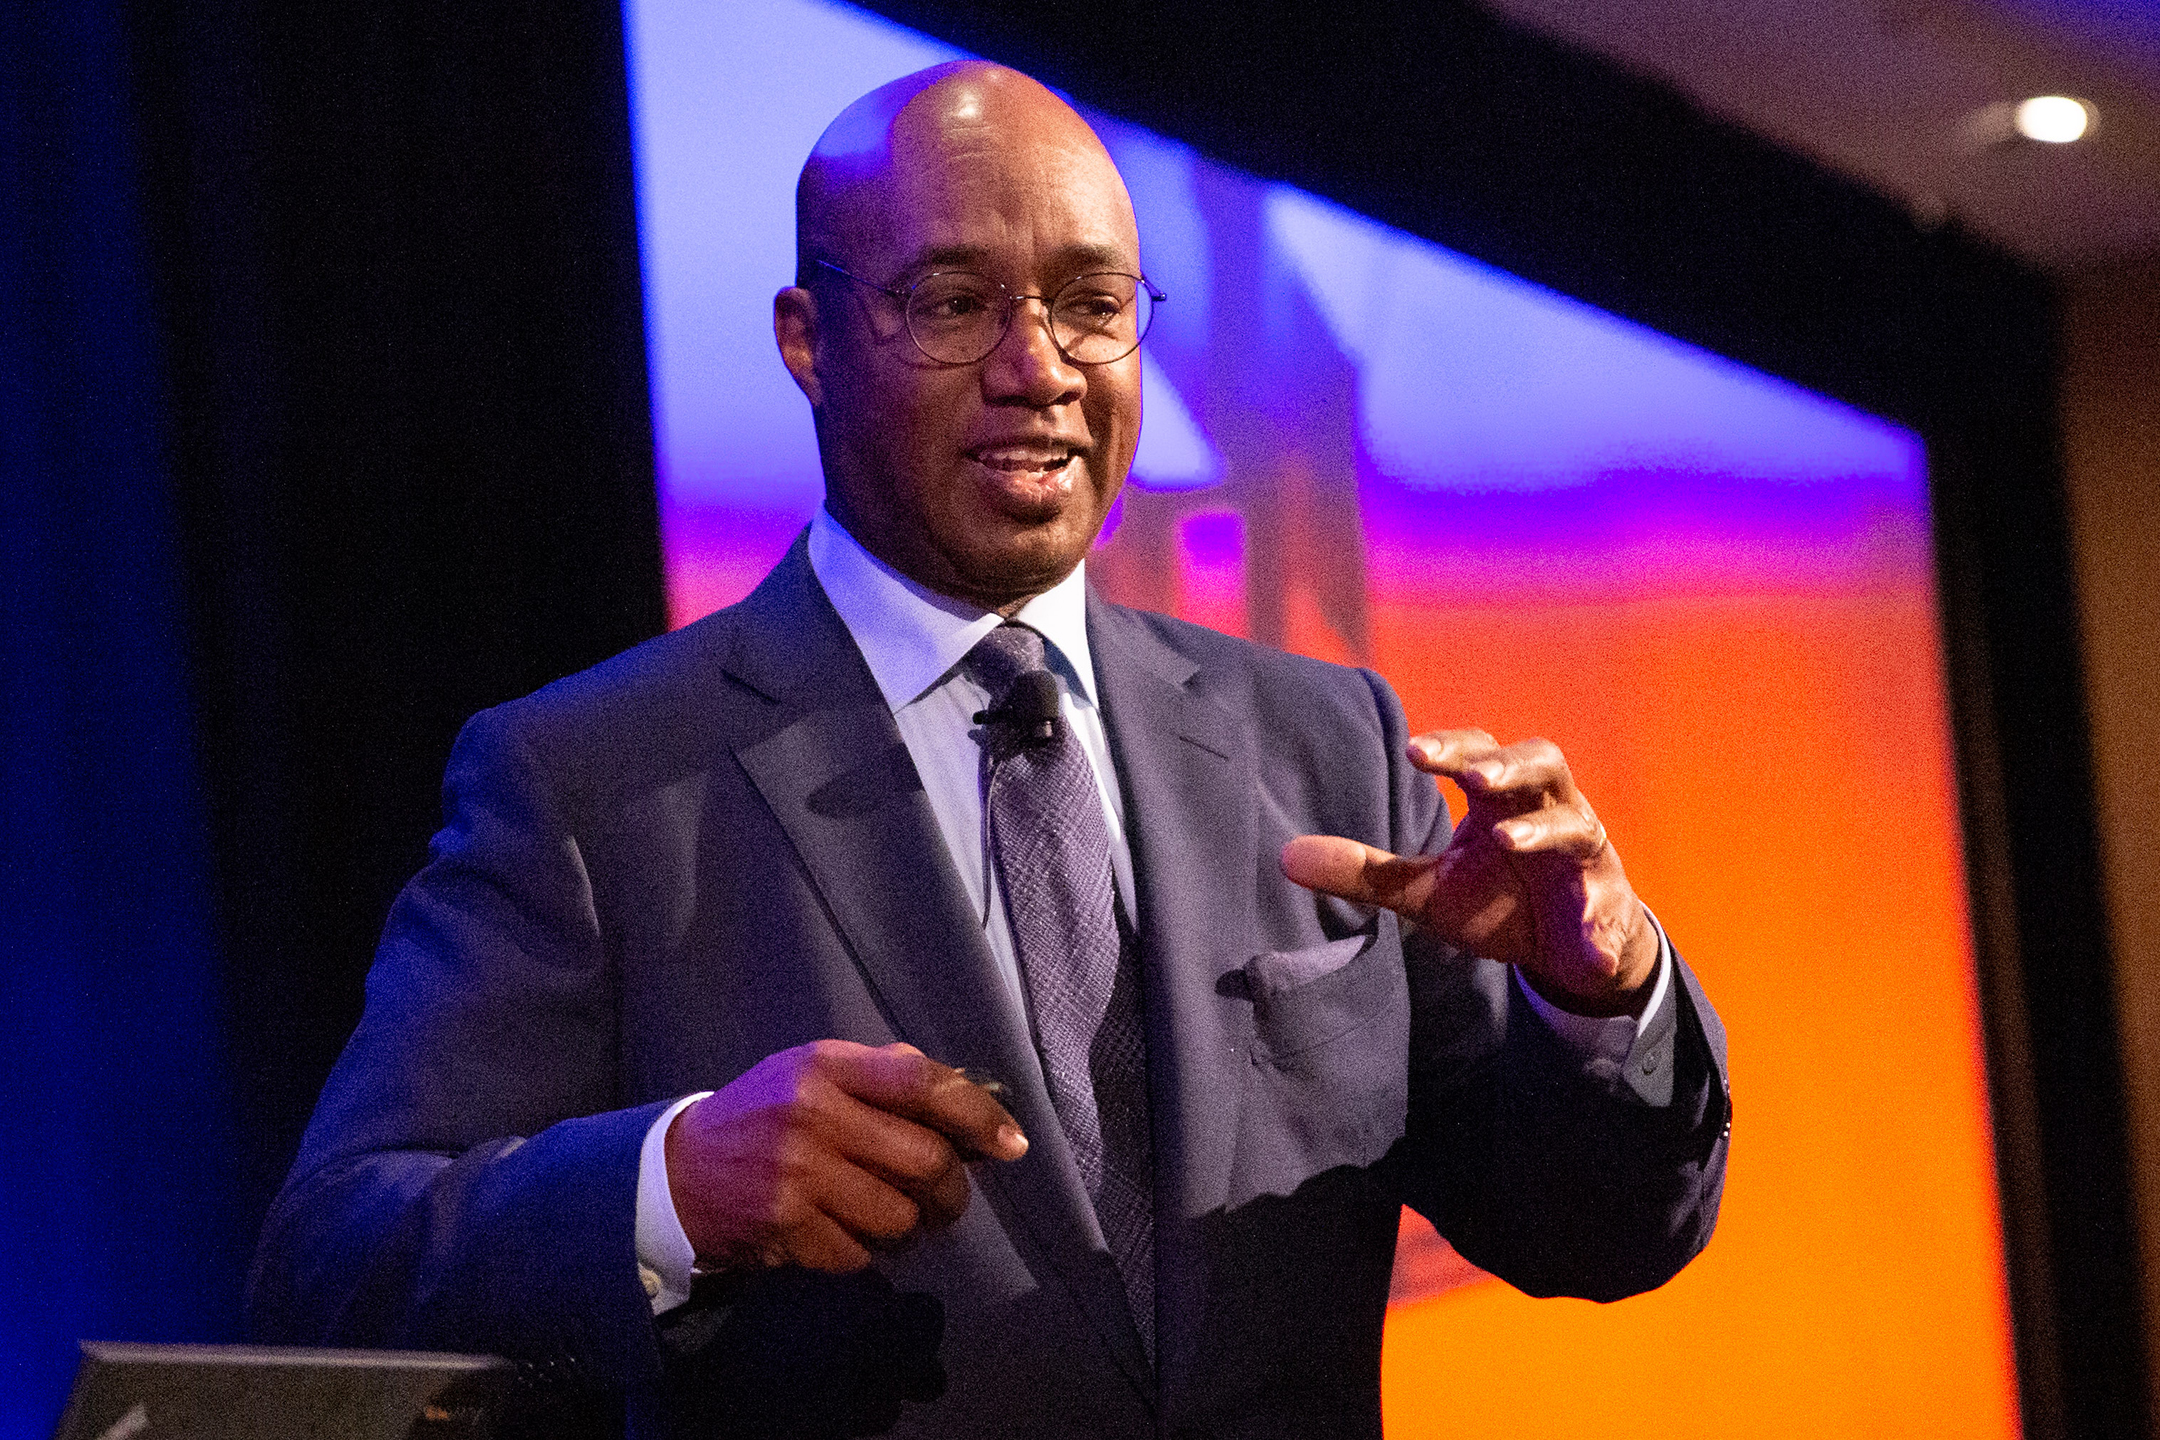 larry irving motions while giving a speech